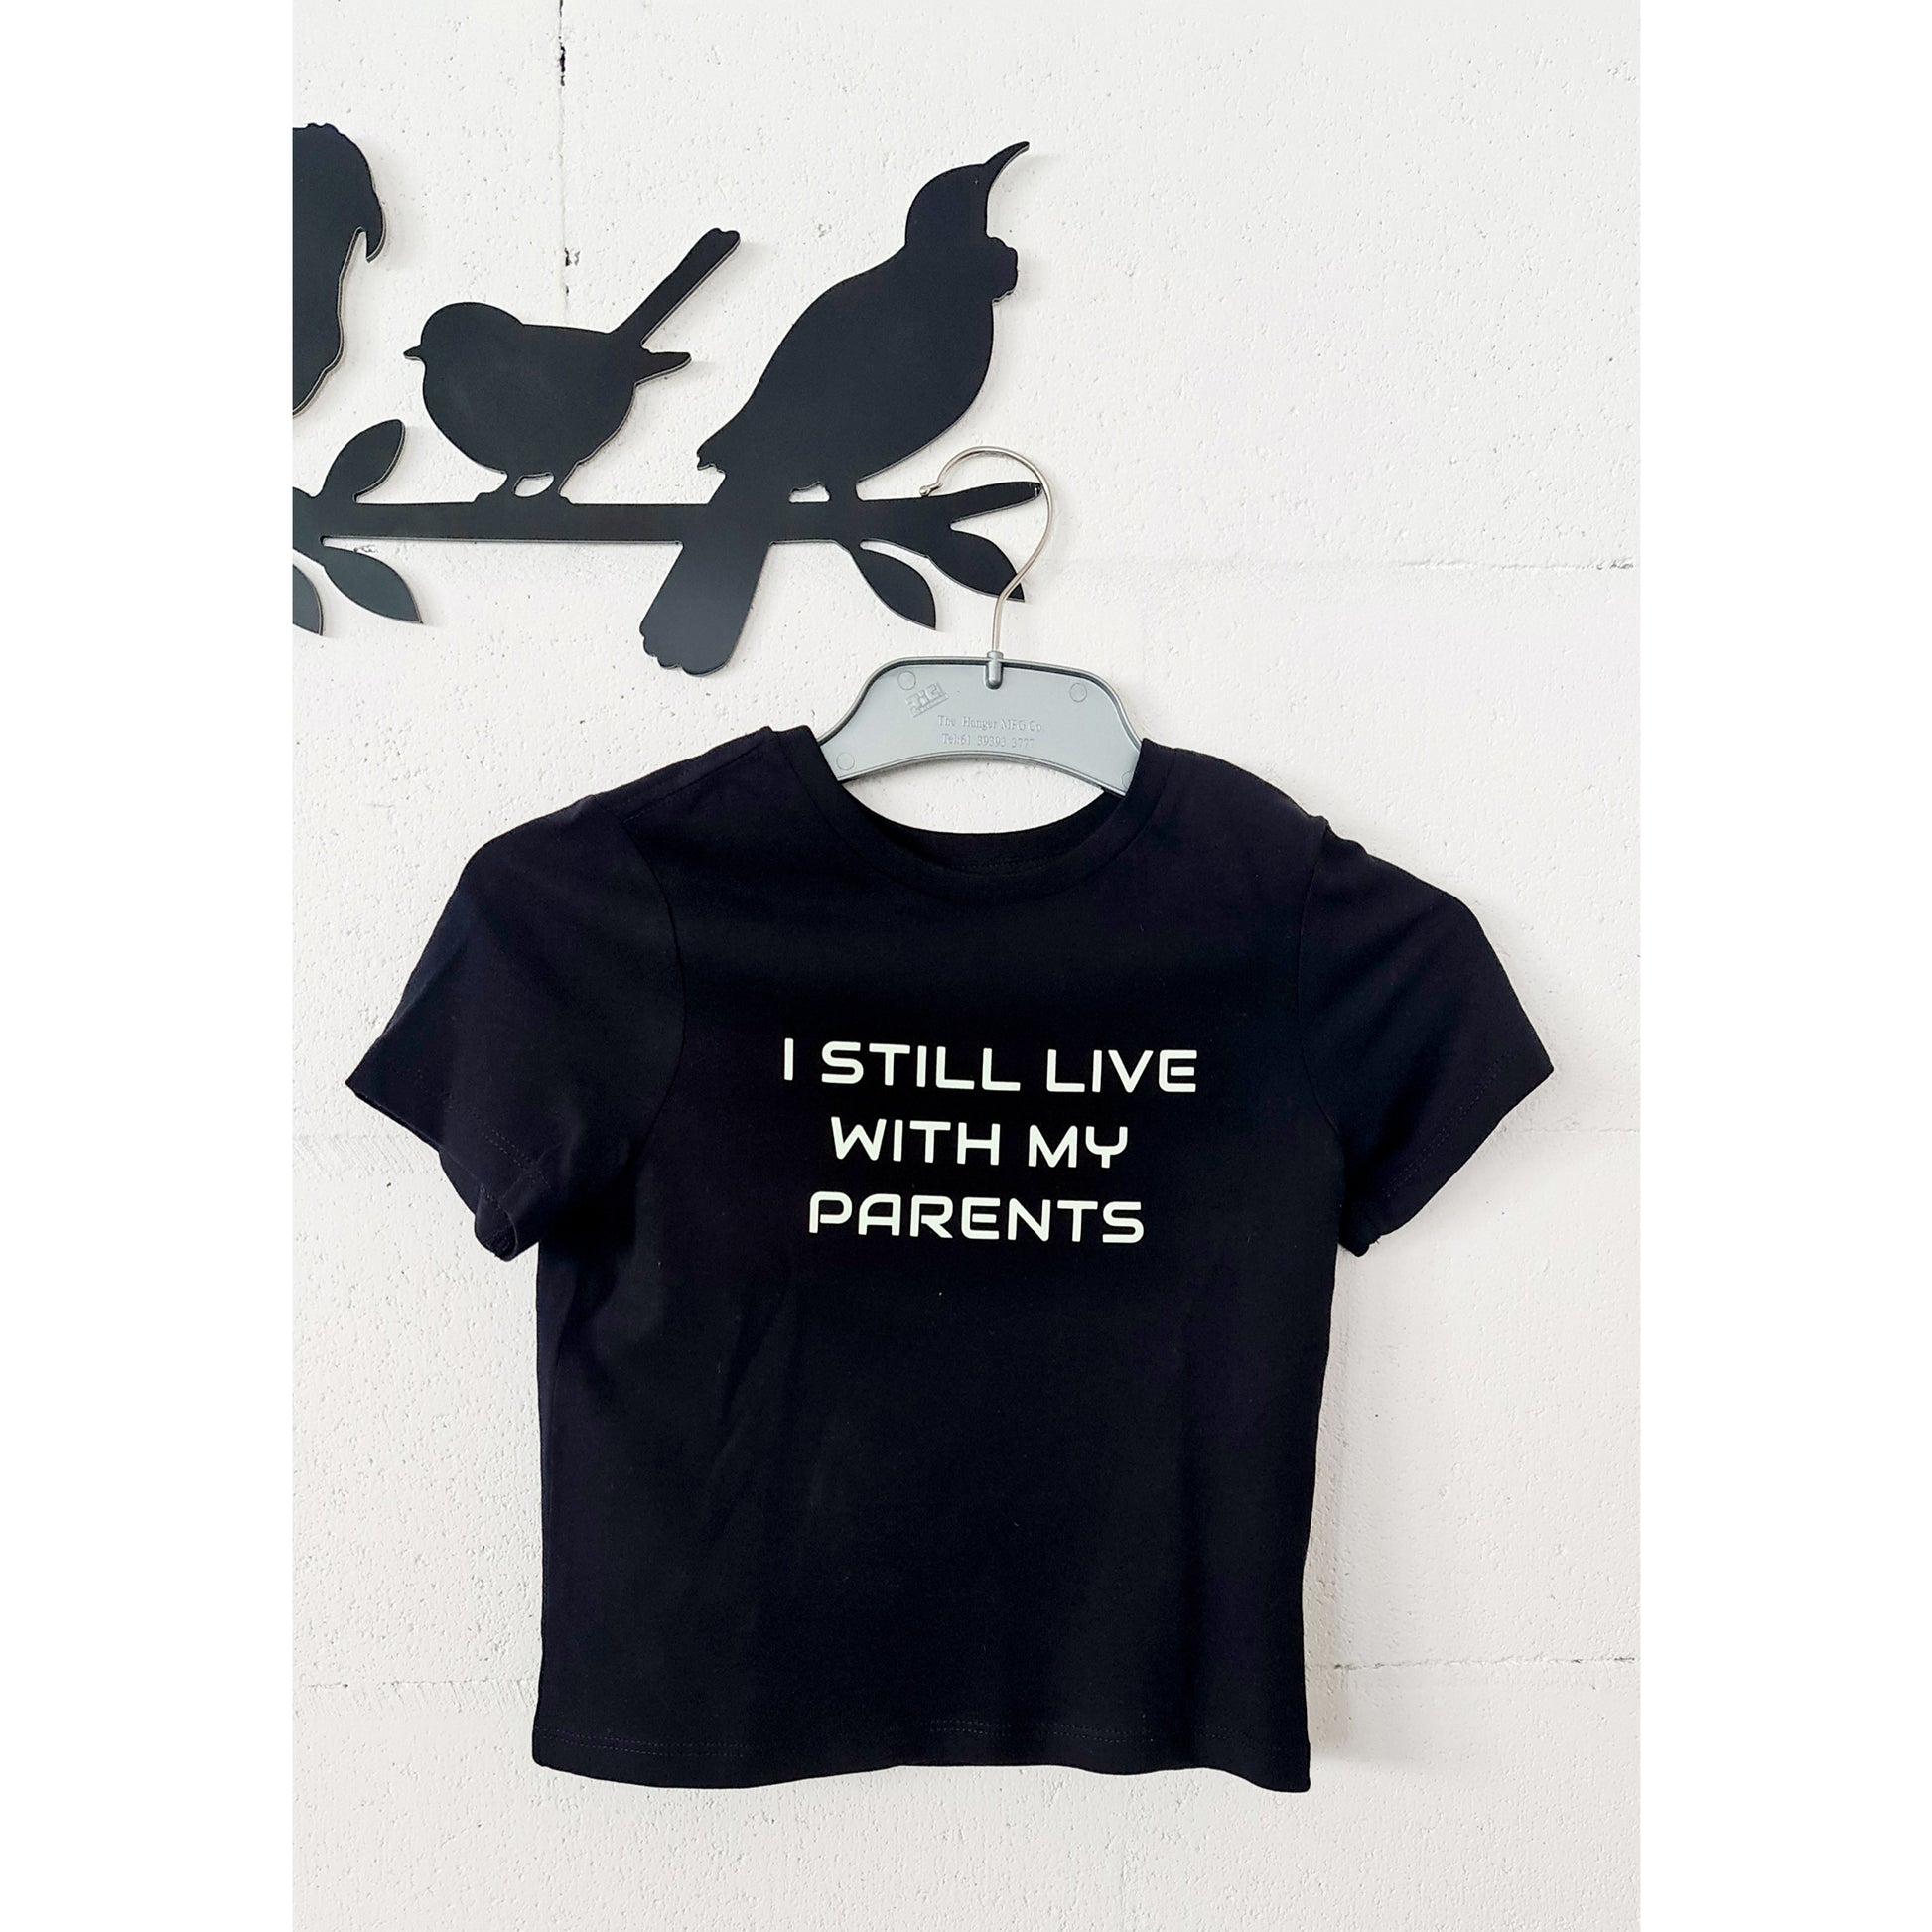 I still live with my parents toddler teeshirt